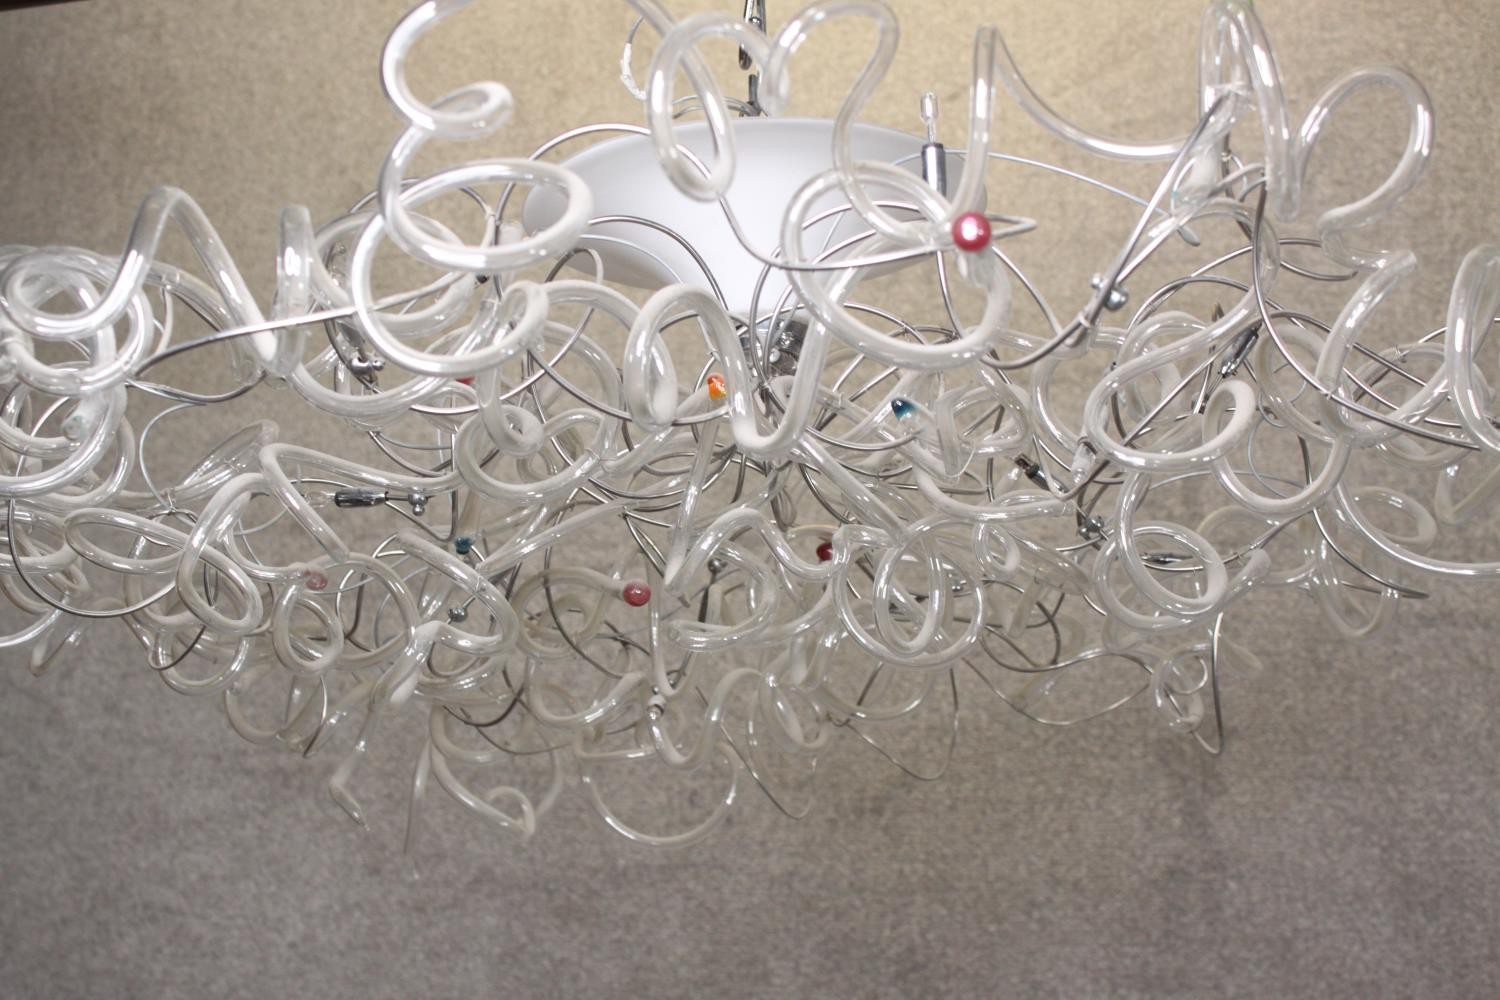 Rocco Borghese. From the artist's Chandelier range. H.25 x Dia. 85 cm. - Image 3 of 5